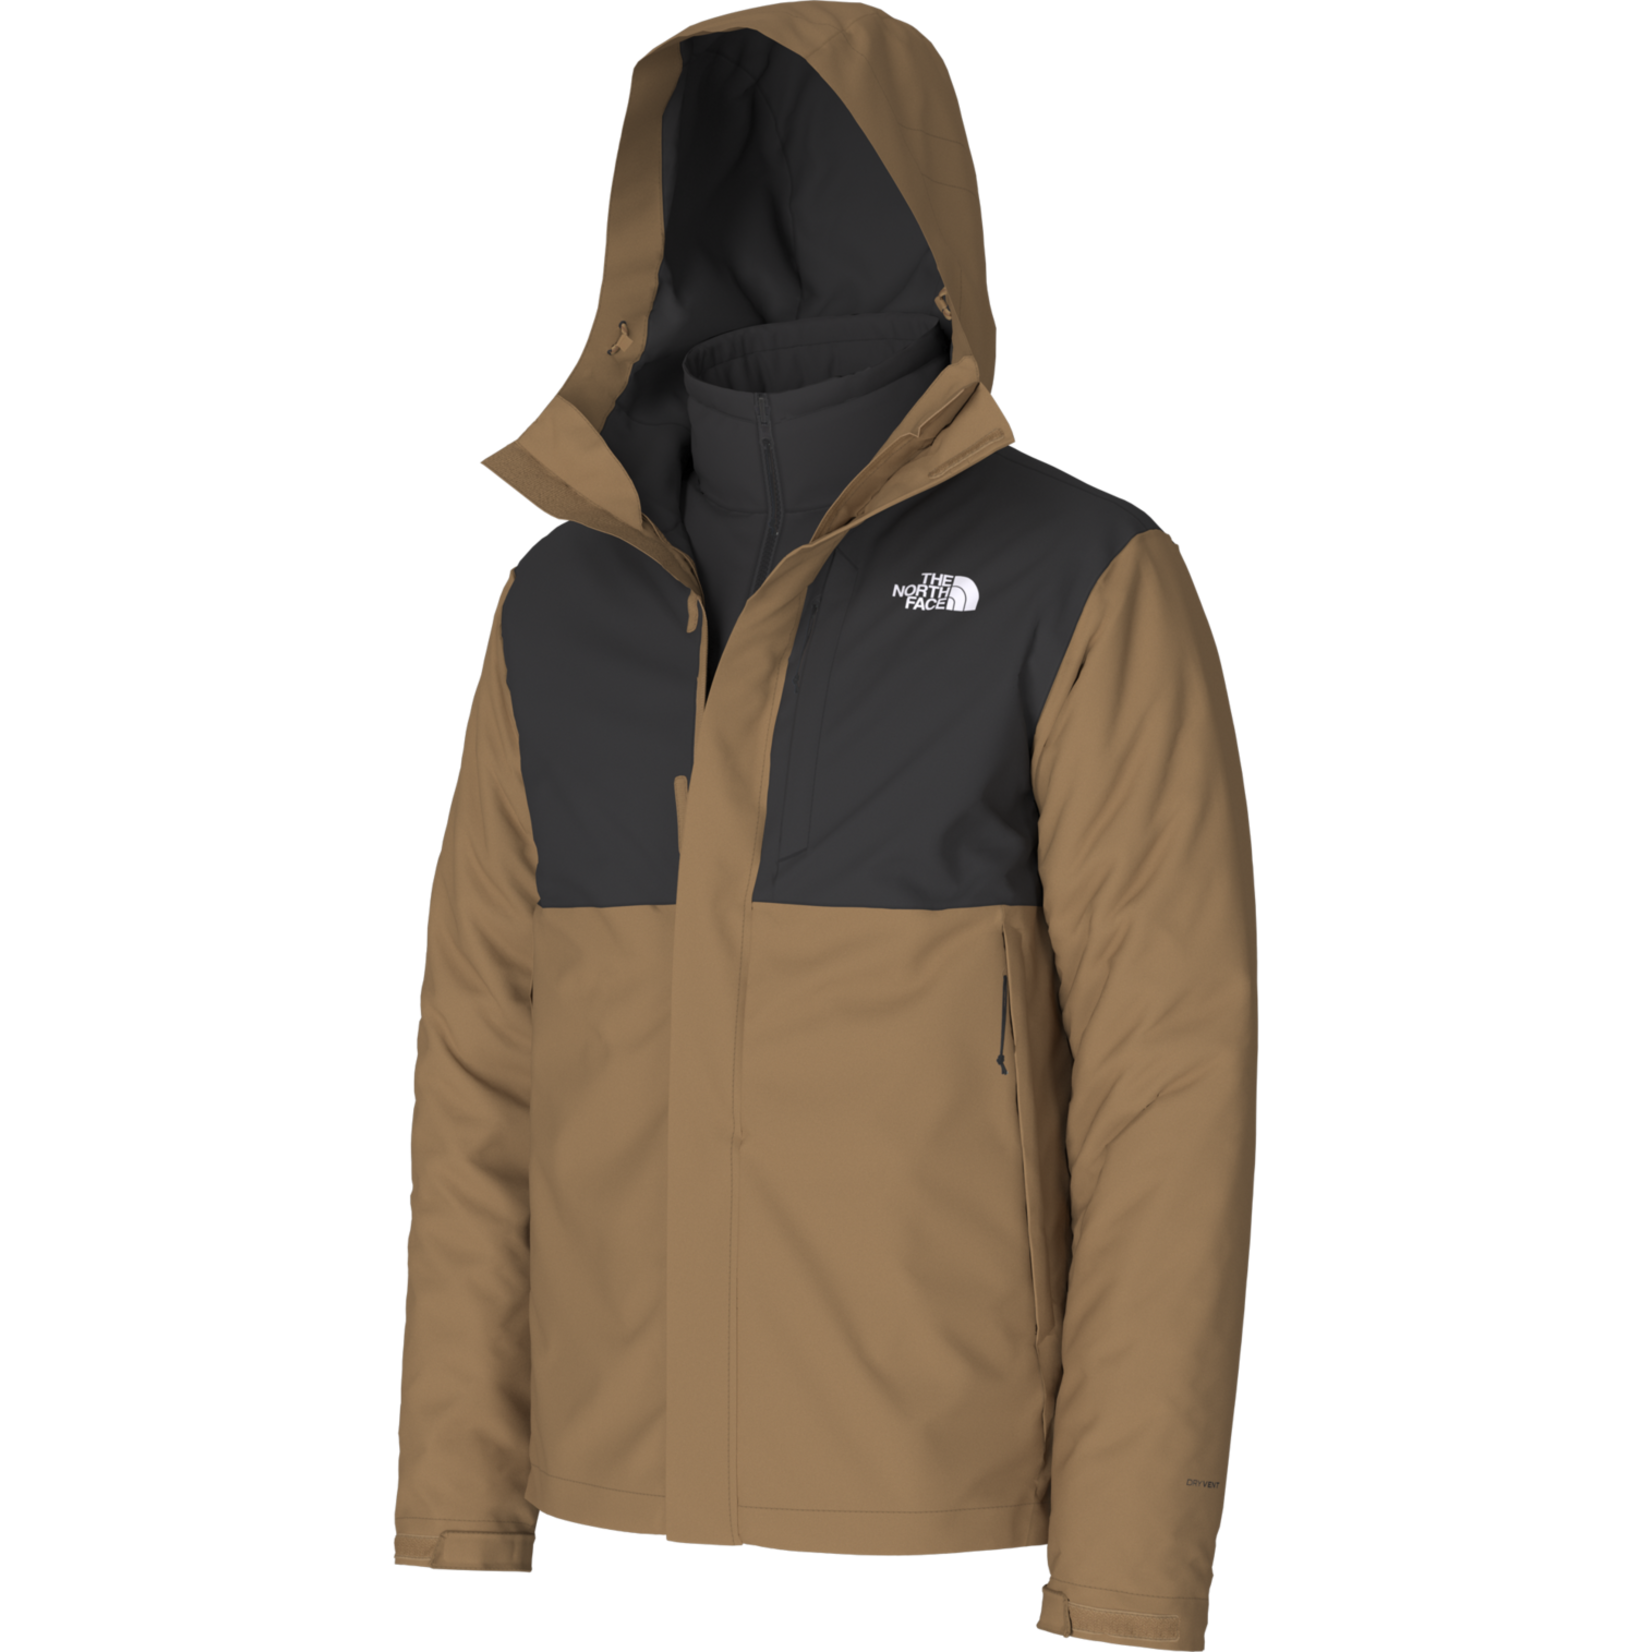 The North Face The North Face Men's Carto Triclimate Jacket